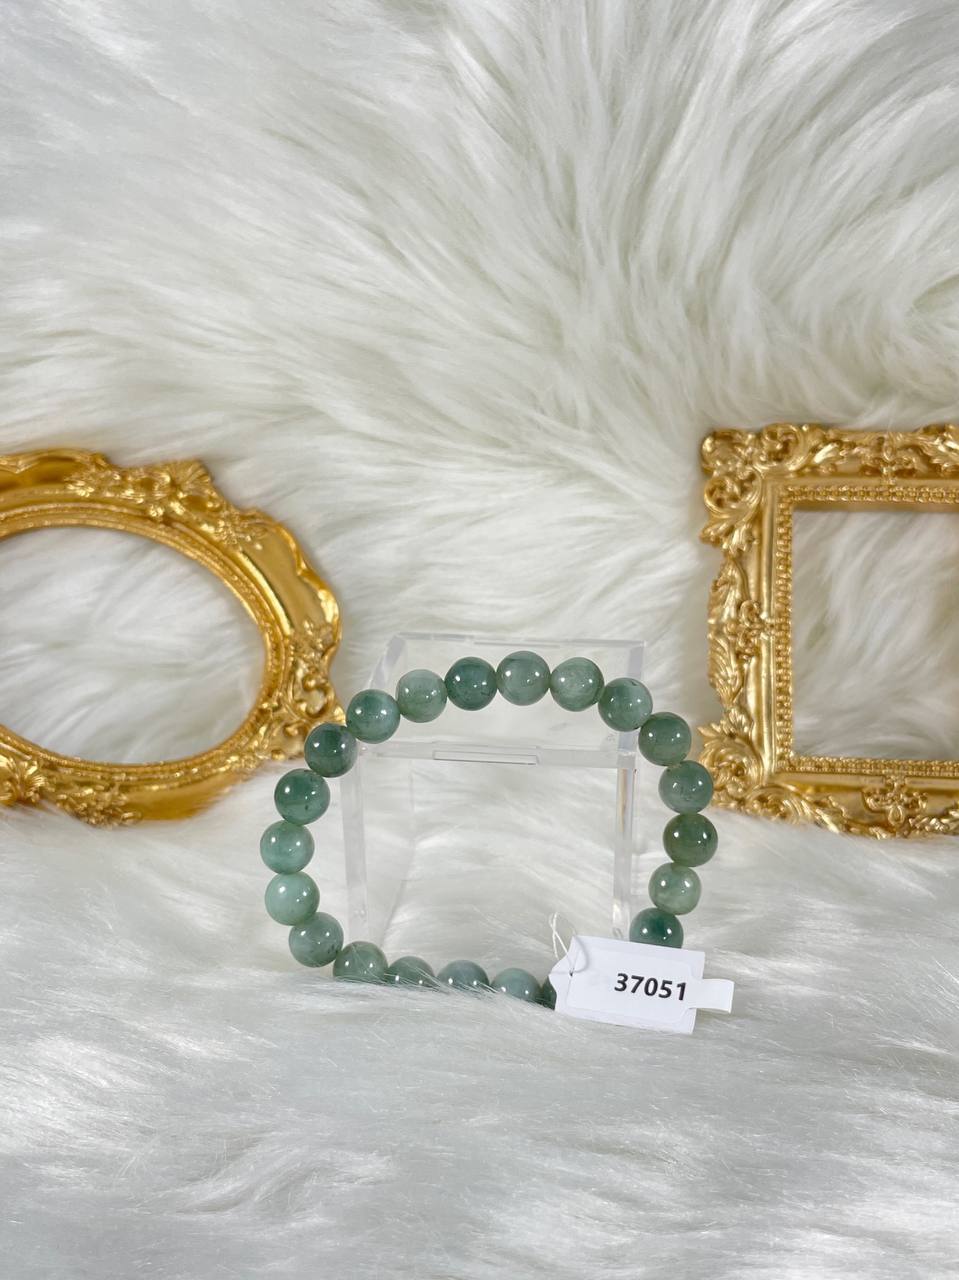 Grade A Natural Jade Beaded Bangle with certificate #37051